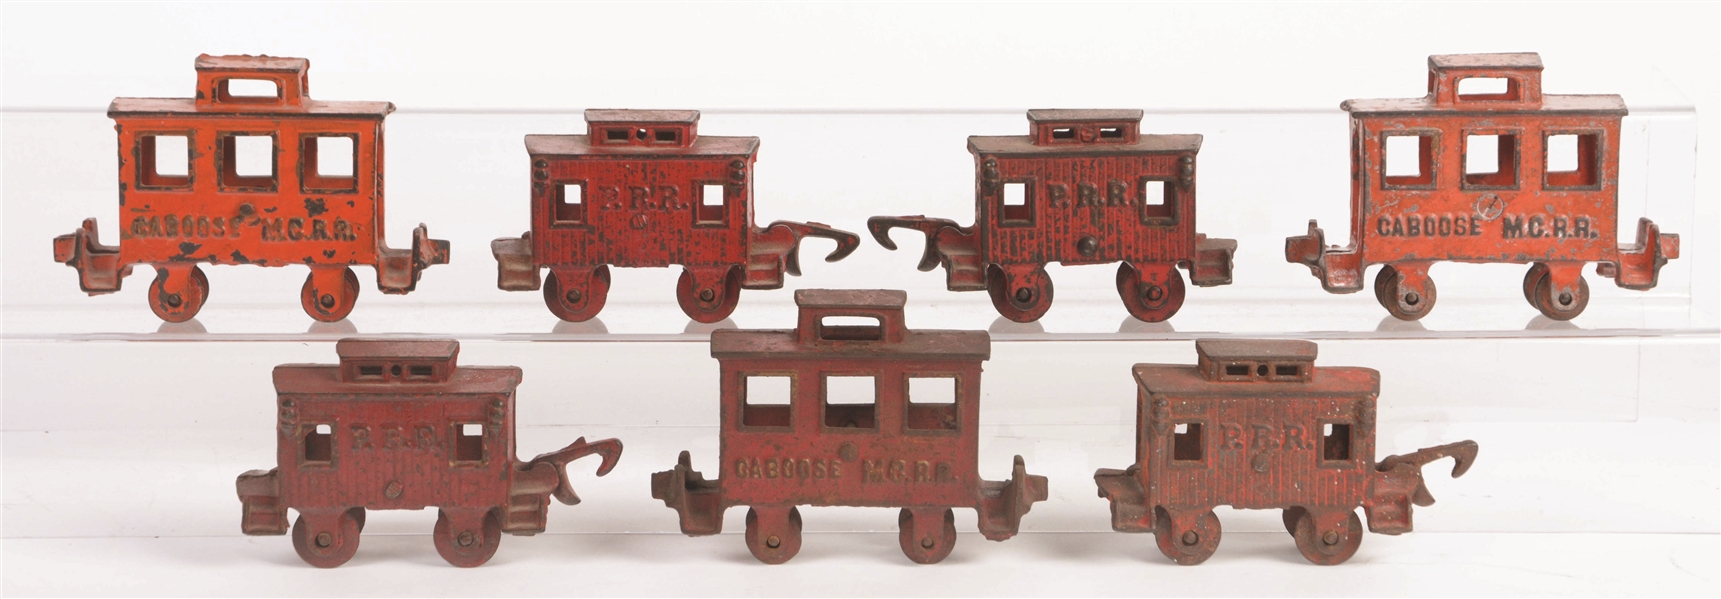 LOT OF 7: CAST-IRON FLOOR TOY CABOOSES BY EITHER HUBLEY OR DENT.